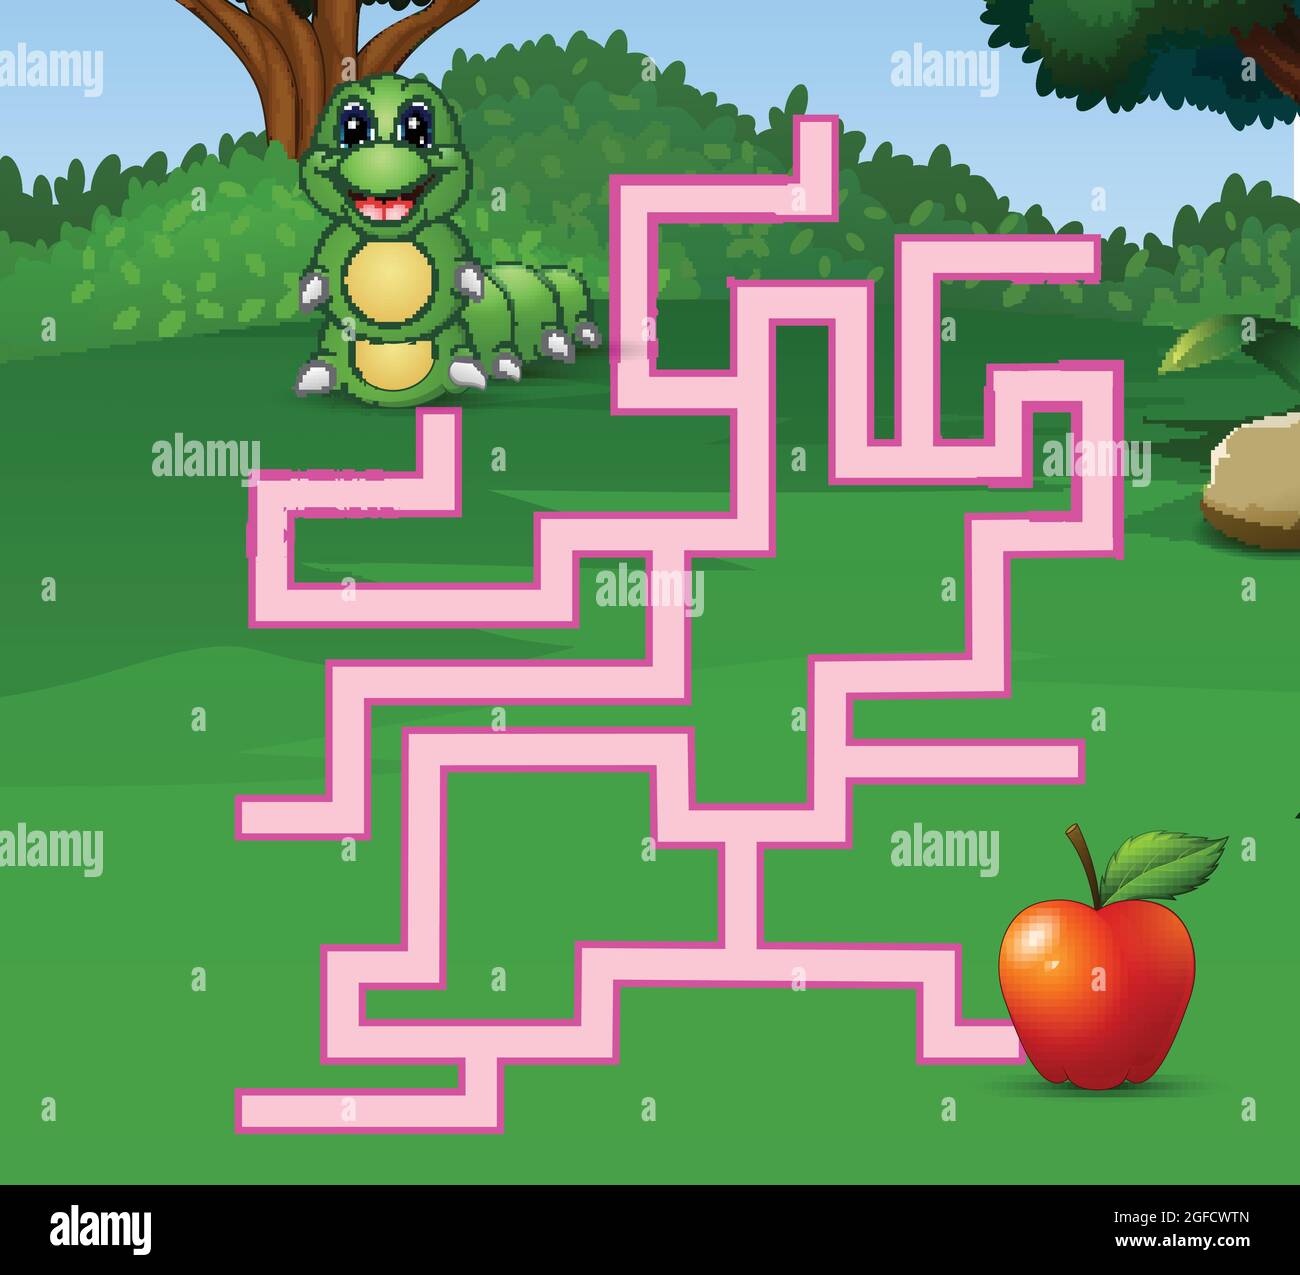 Game caterpillar maze find their way to the apple Stock Vector